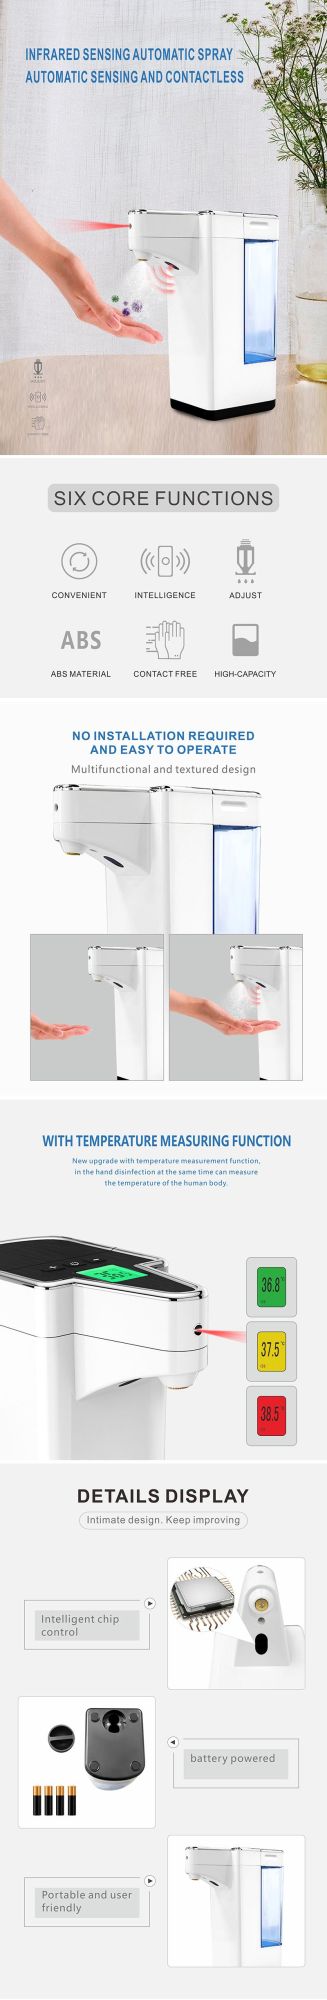 Hot Sale CE Certified Automatic Soap Dispenser, 600ml Smart Sensor Non-Contact Hand Sanitizer Dispenser Alcohol Spray Machine with Competitive Price